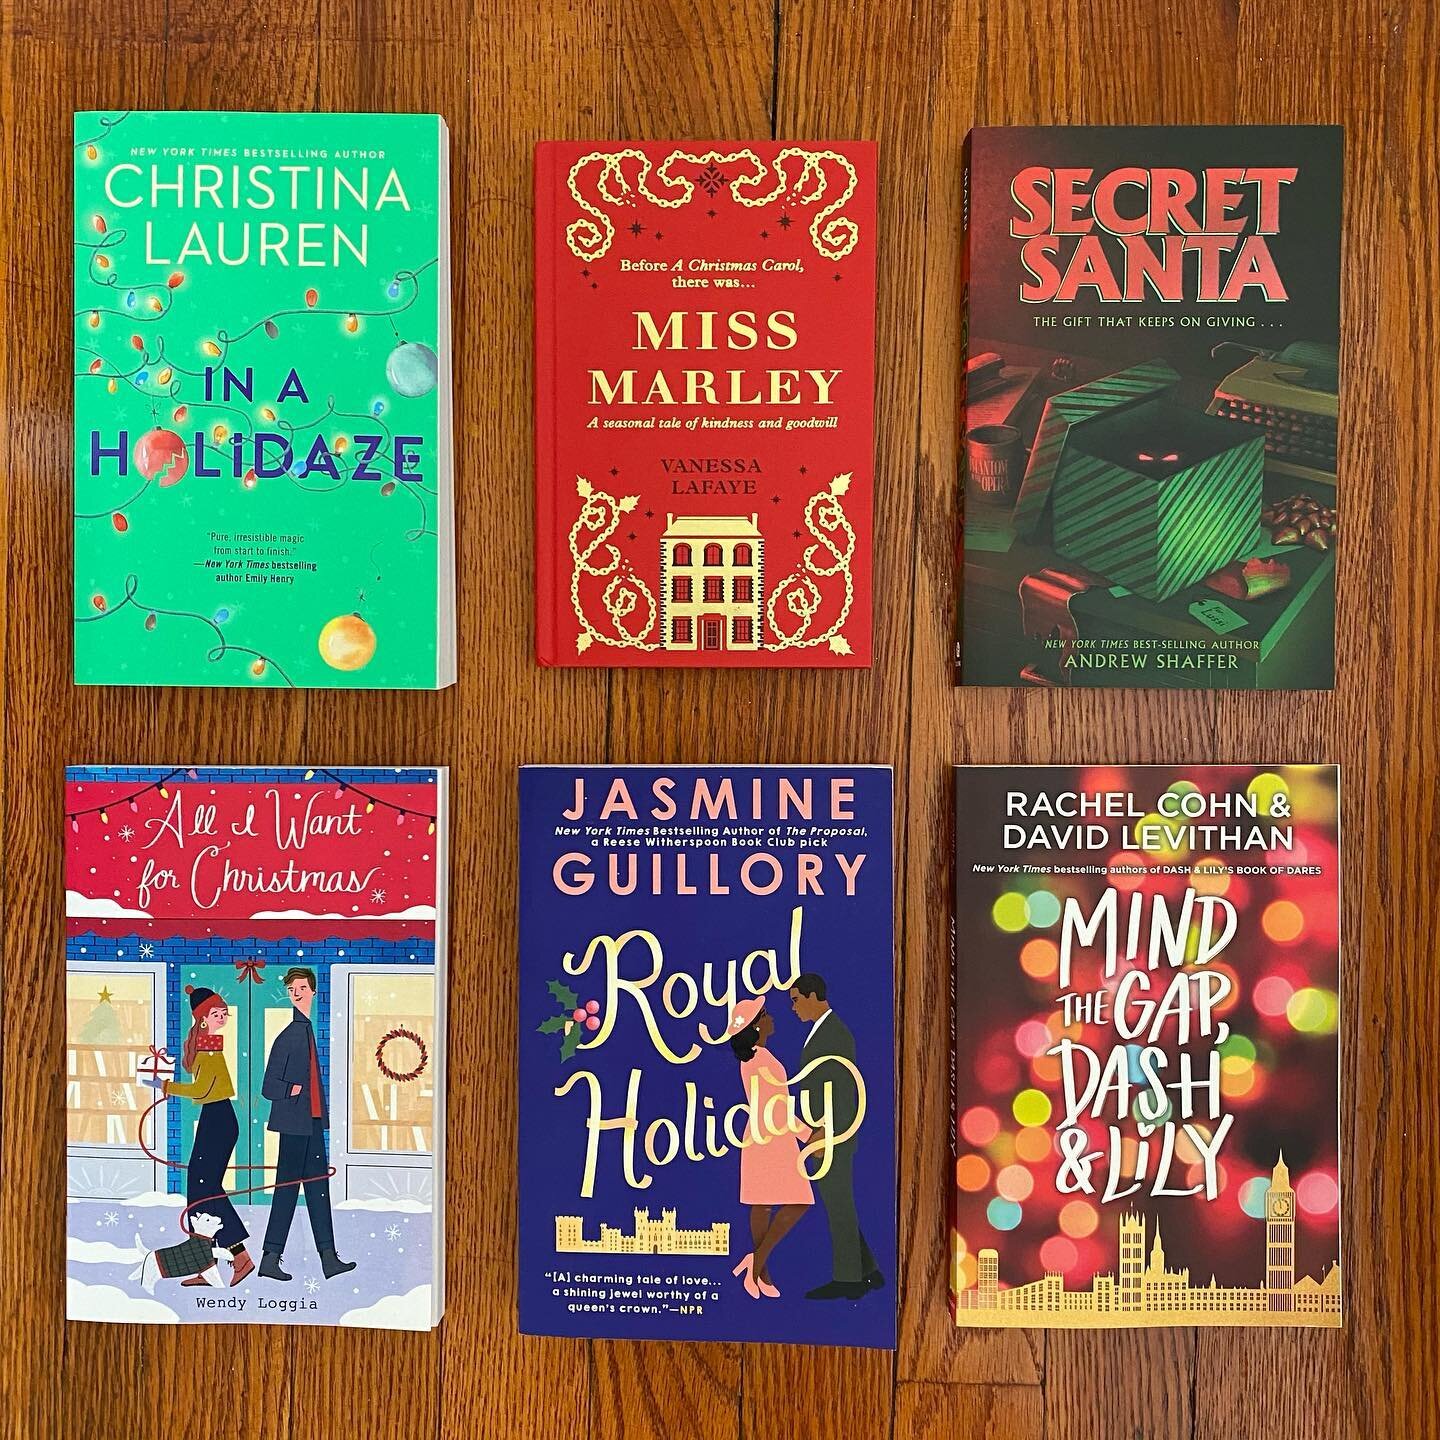 A year like this requires lots and lots of cozy holiday reading. As I&rsquo;ve been watching and doing online events this autumn, I&rsquo;ve been purchasing these books (and supporting these bookstores!) in preparation:
.
@christinalauren&rsquo;s IN 